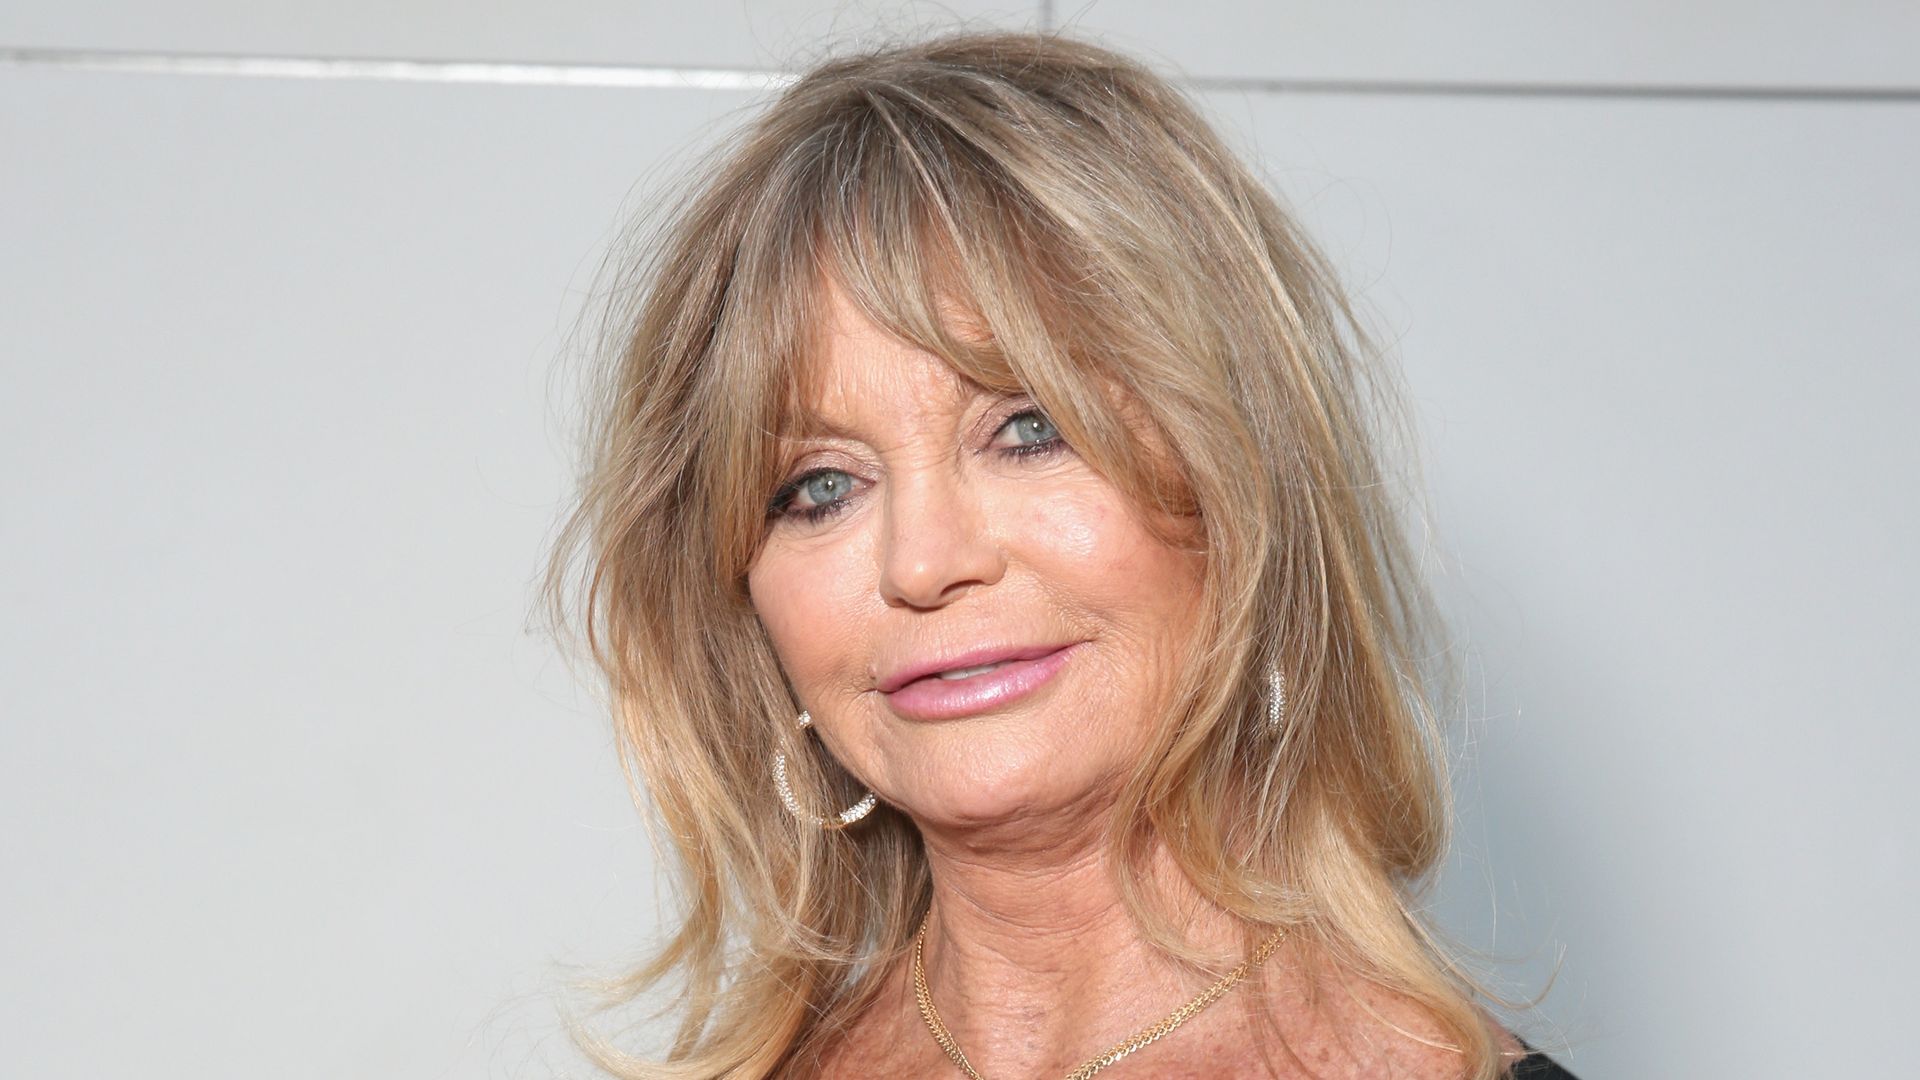 Goldie Hawn attends UCLA IOES celebration of the Champions of our Planet's Future on March 24, 2016 in Beverly Hills, California